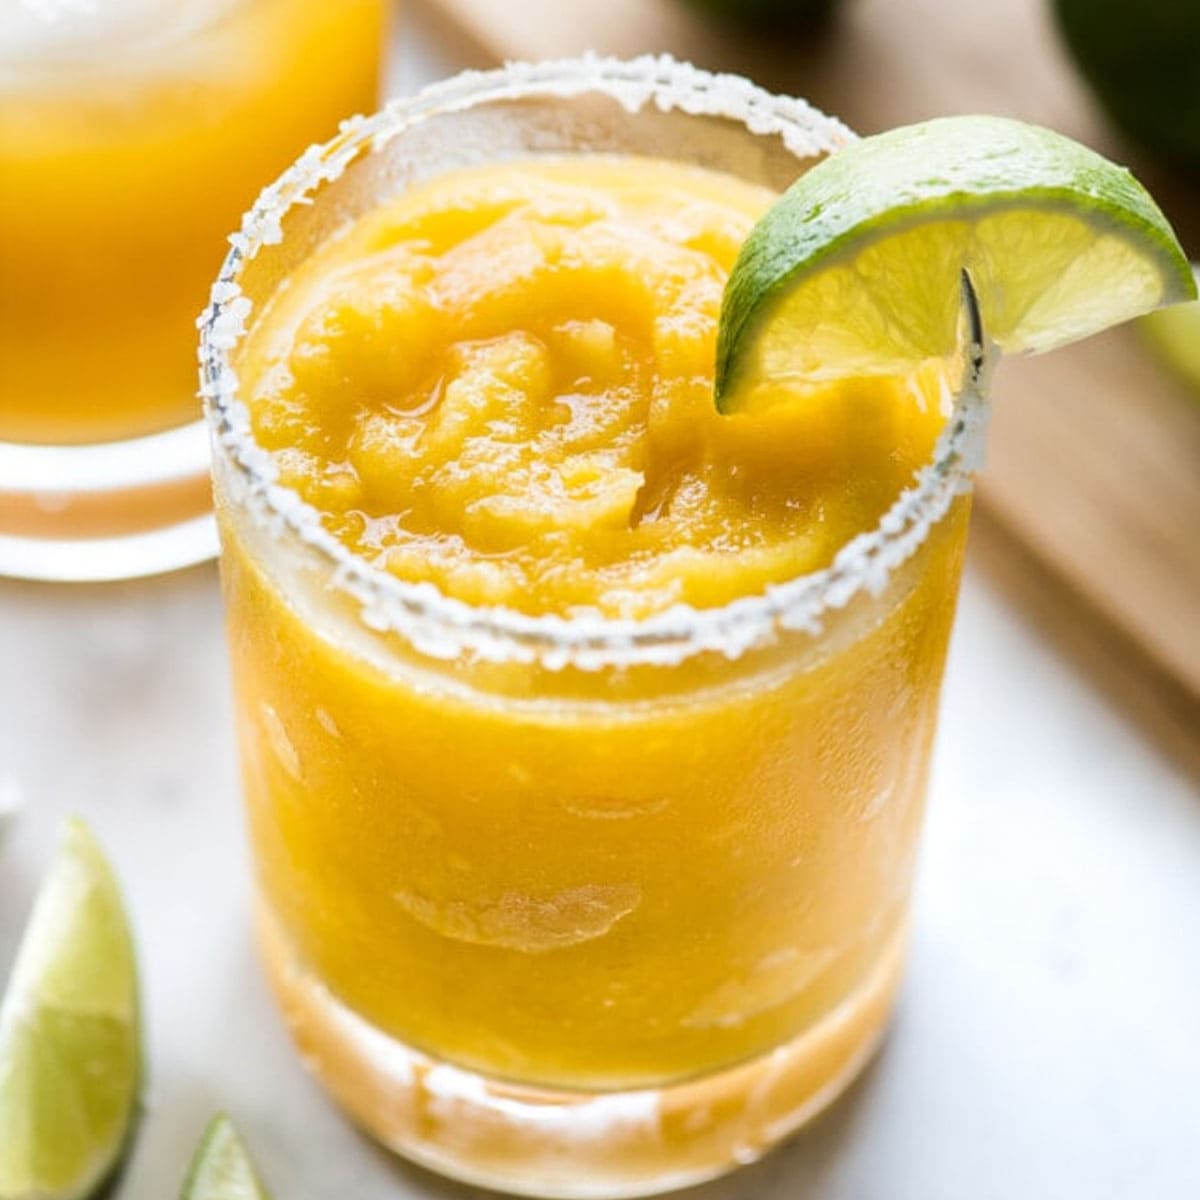 A mango margarita served frozen with a lime wedge.